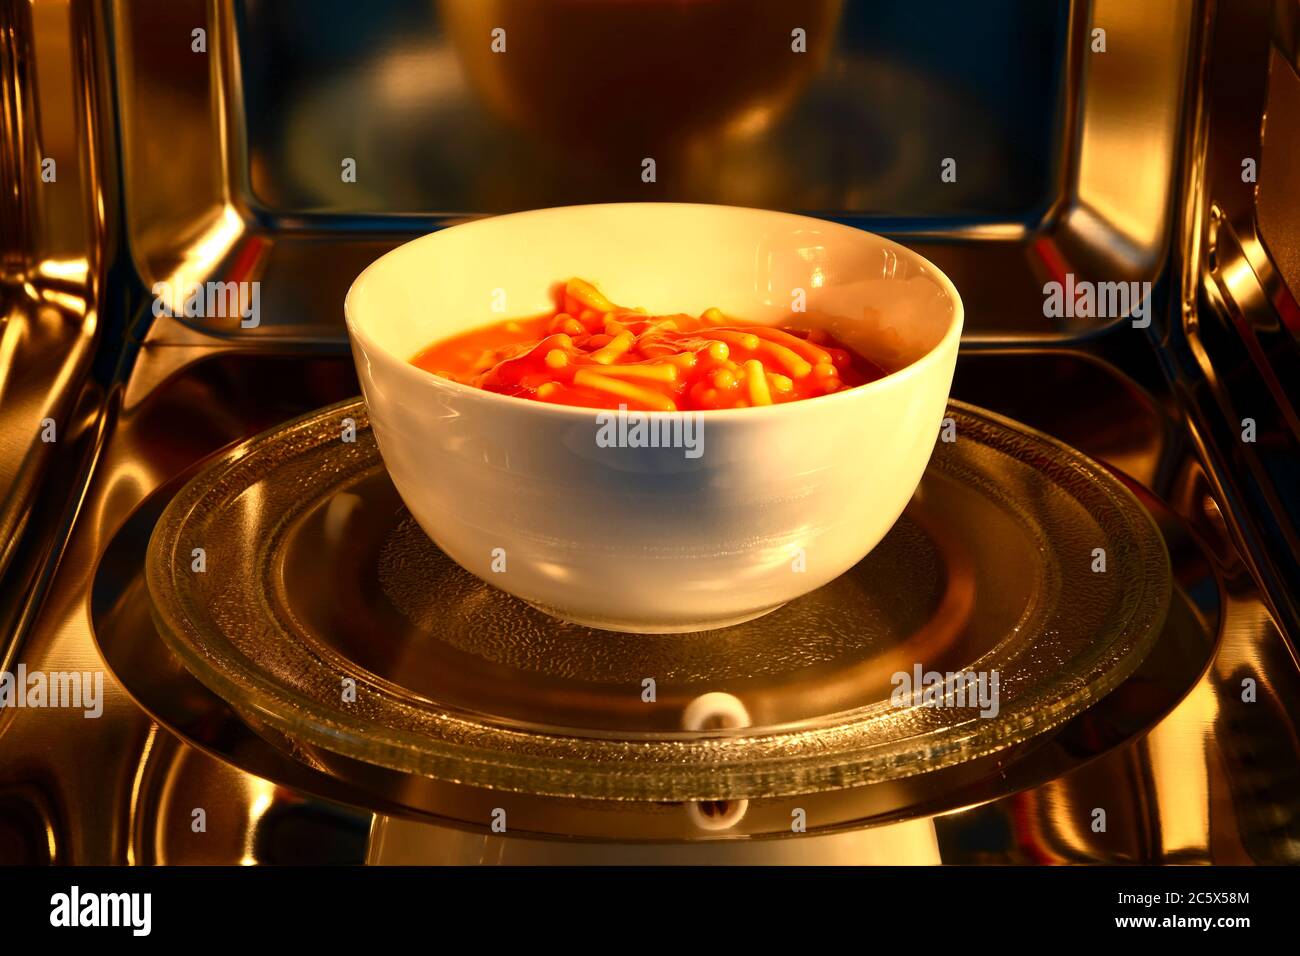 https://c8.alamy.com/comp/2C5X58M/bowl-of-spaghetti-pasta-inside-the-cavity-of-a-stainless-steel-microwave-oven-2C5X58M.jpg